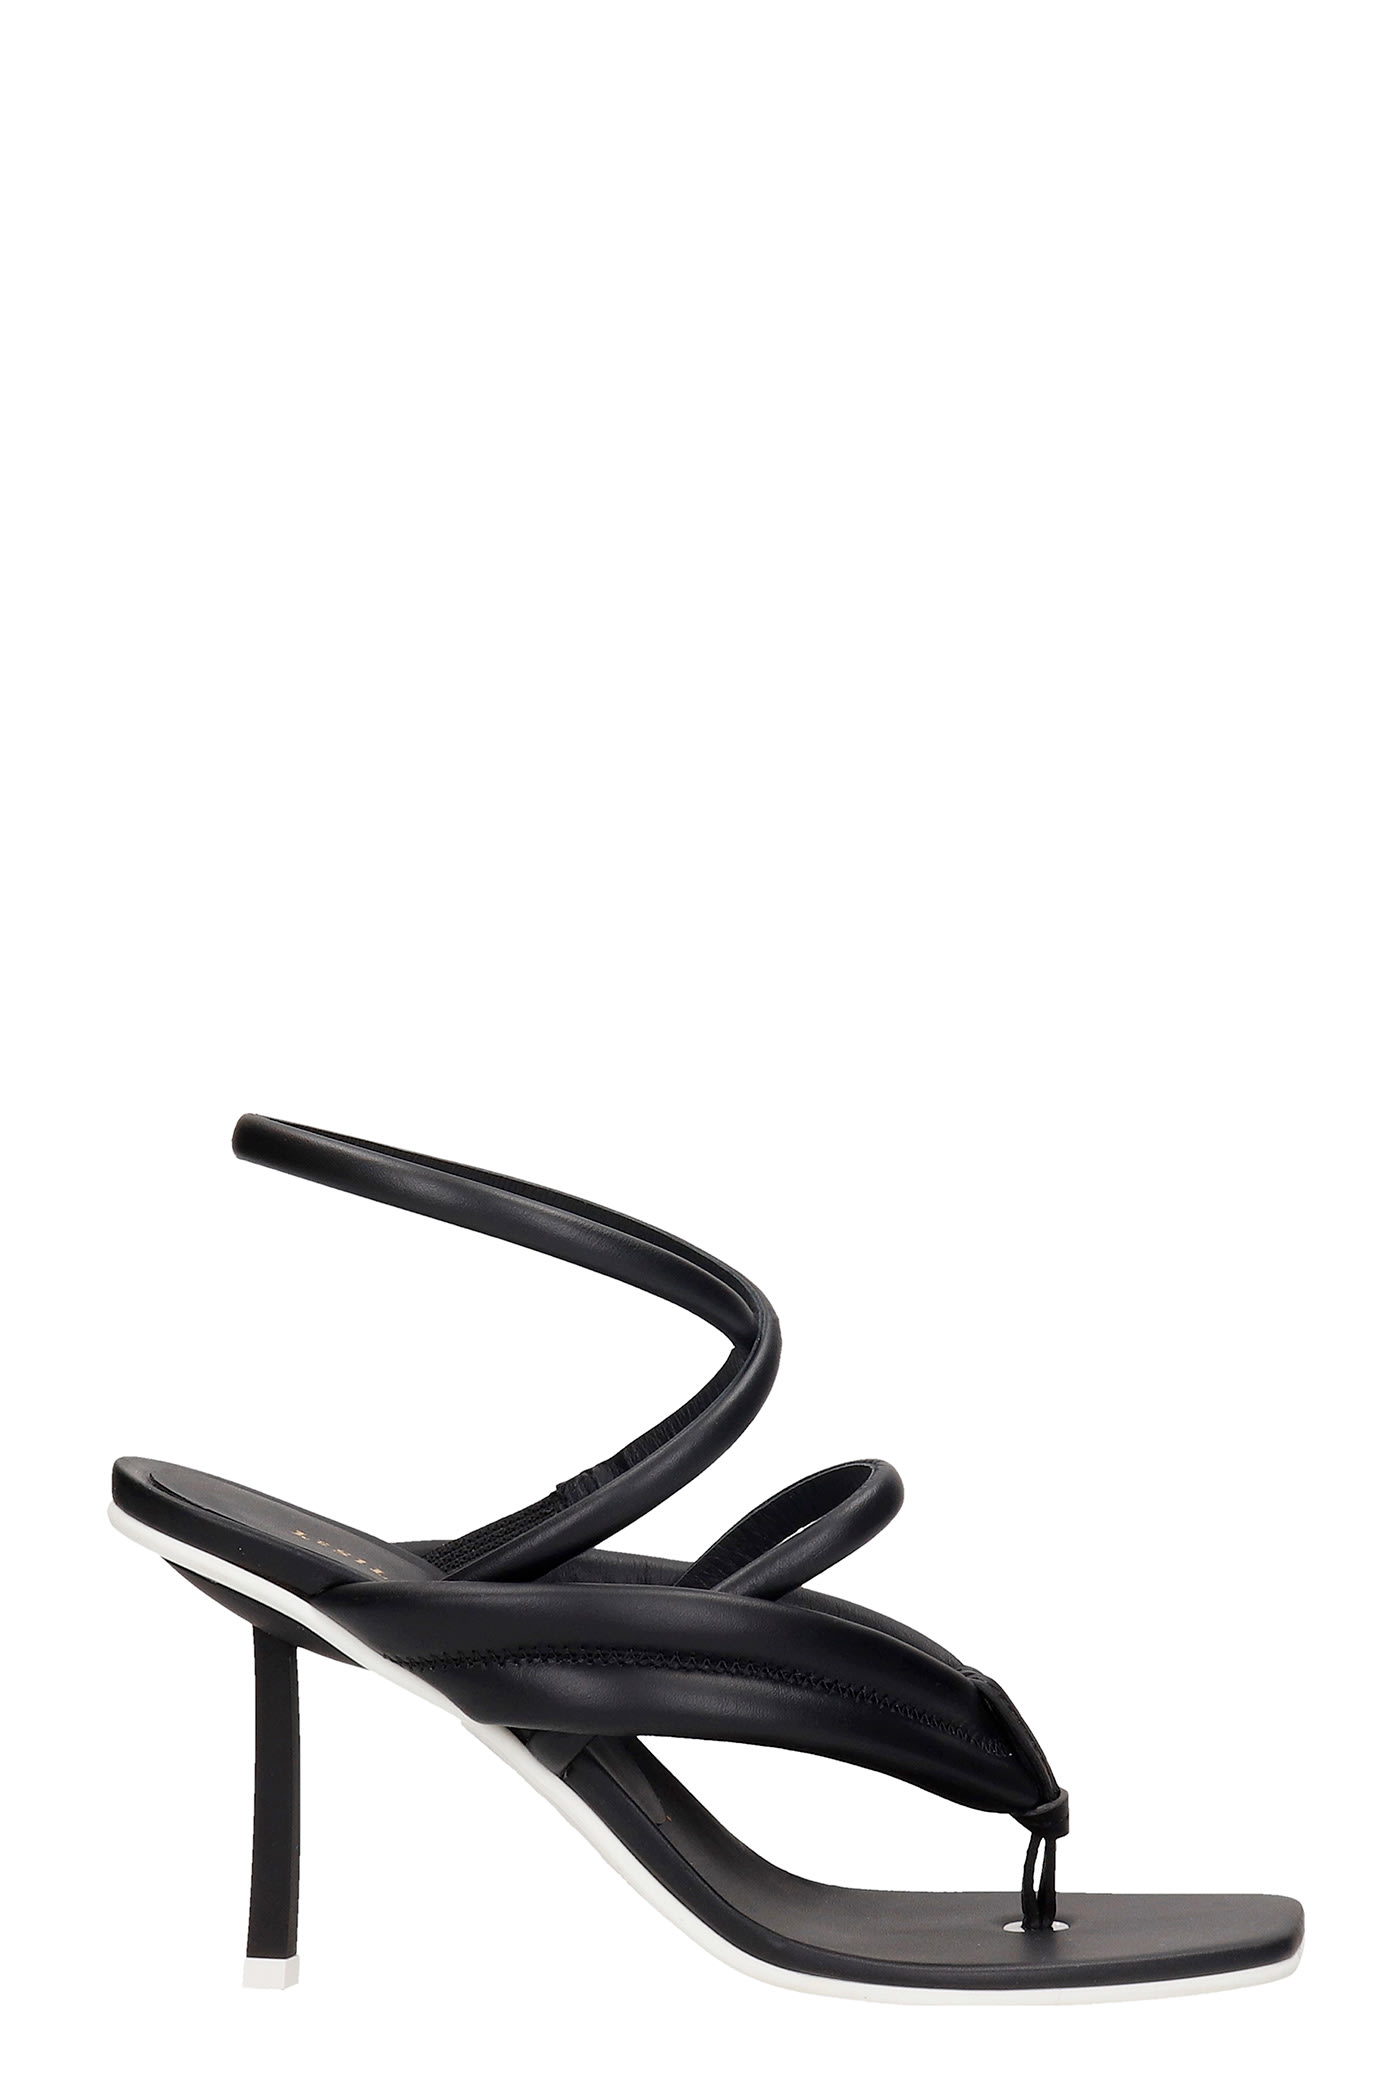 LE SILLA SANDALS IN BLACK LEATHER,5143S080H1PPCHI001